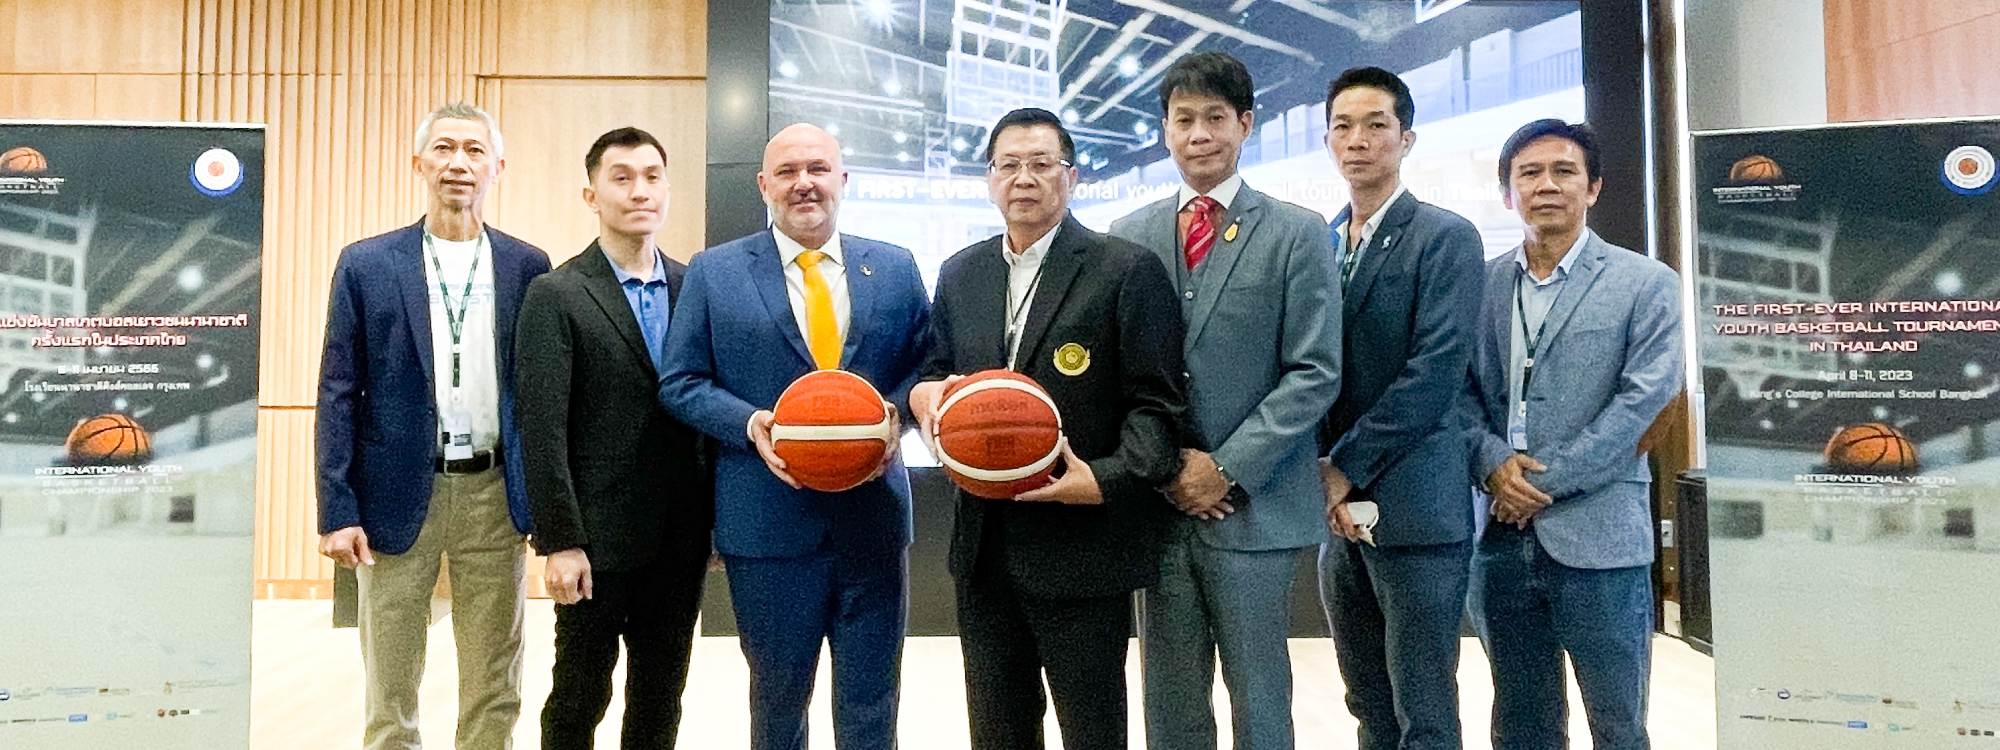 The First-ever International Youth Basketball Tournament in Thailand at King’s Bangkok